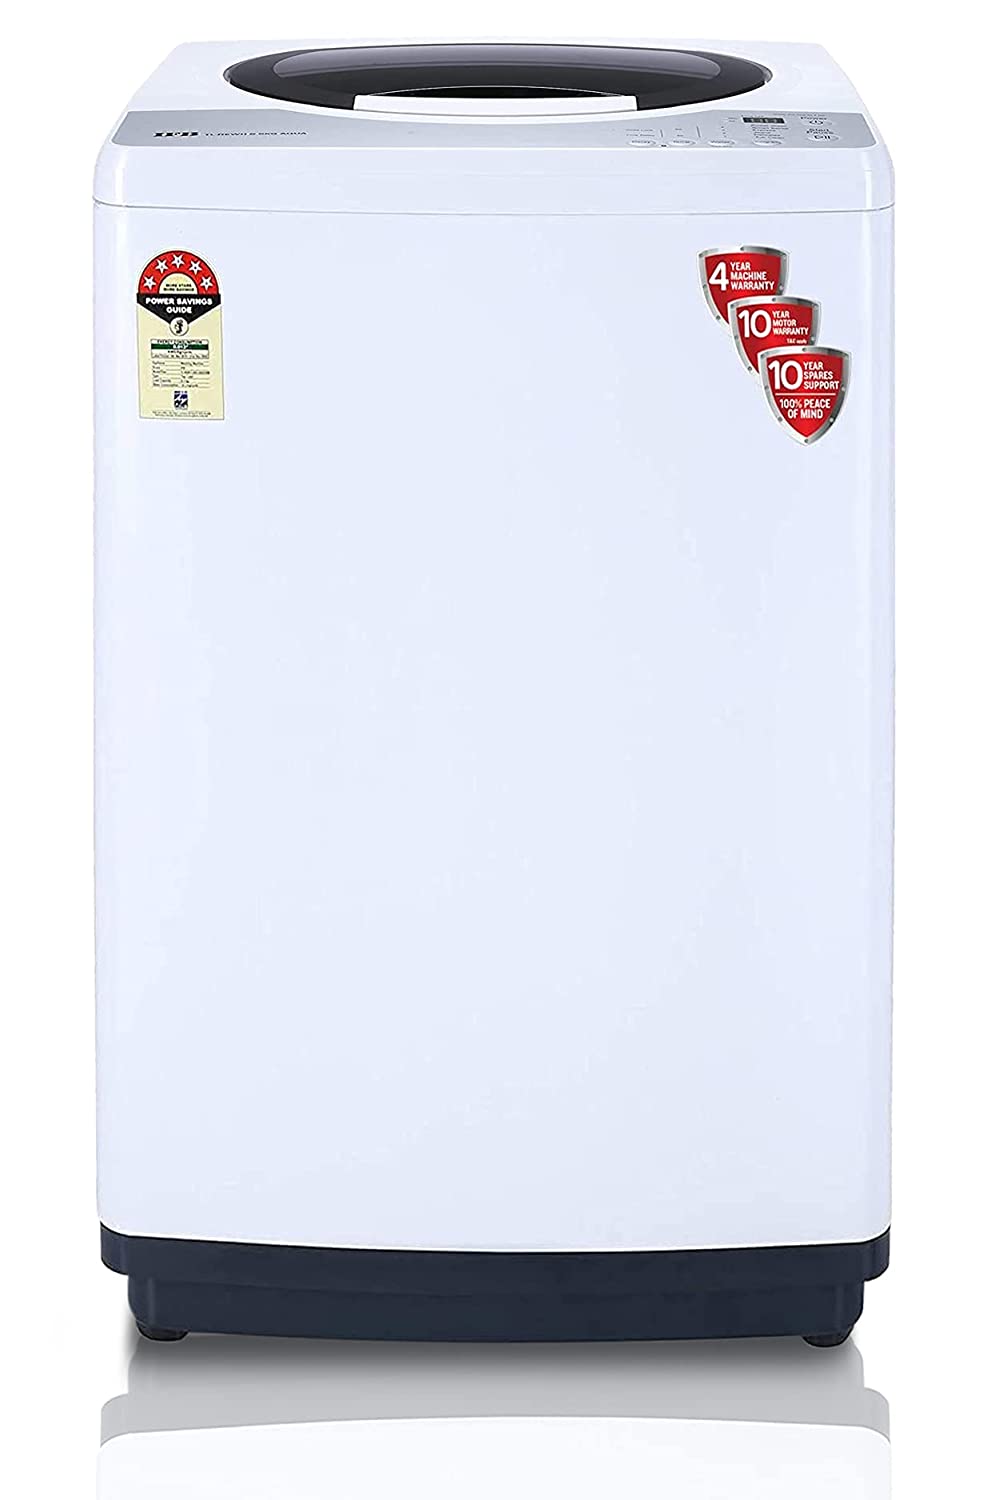 Ifb 6.5 Kg 5 Star Fully-automatic Top Loading Washing Machine